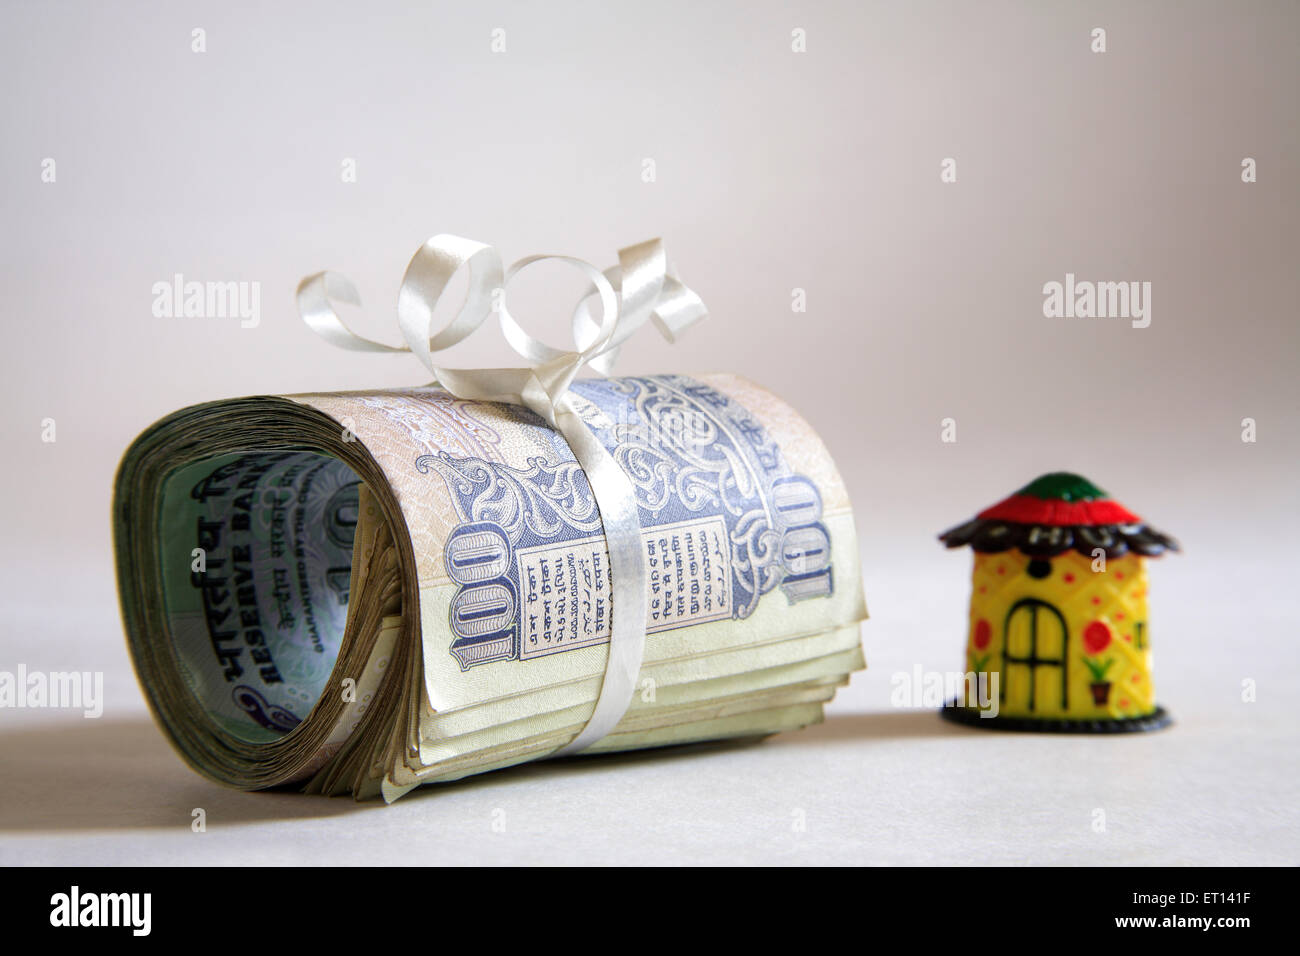 Plastic home model and bundle of hundred rupees notes on white background Stock Photo